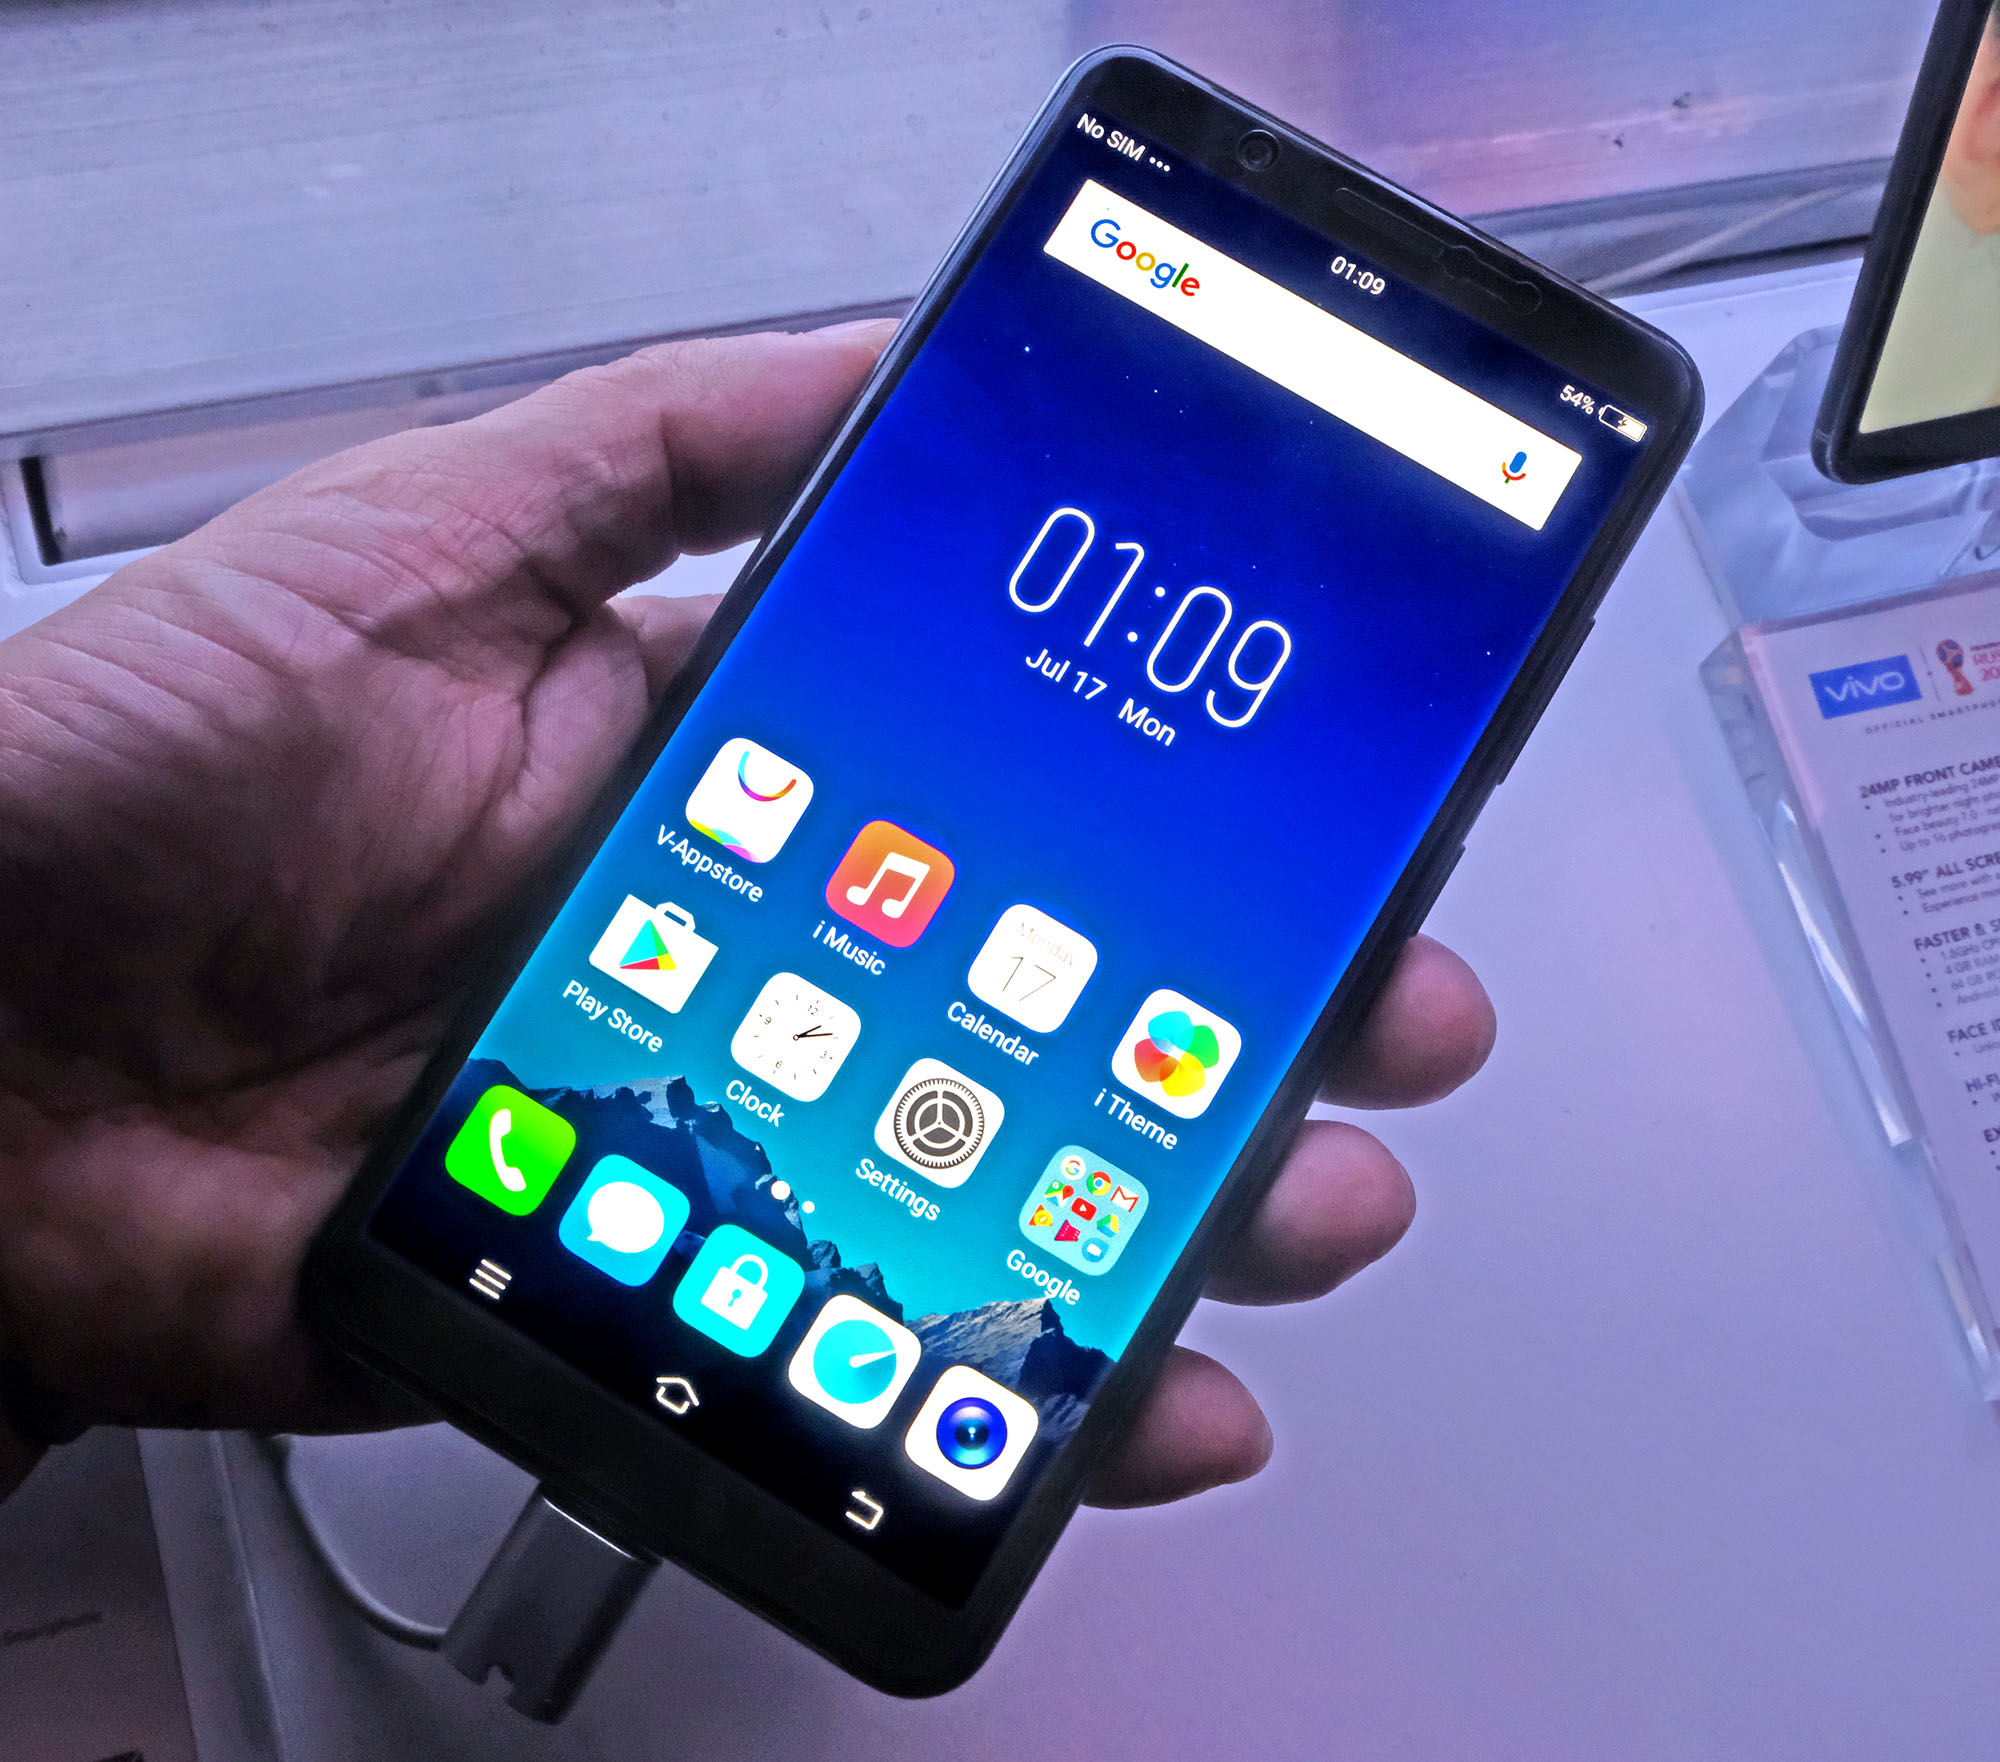 Vivo V7+ now available in PH with top notch features